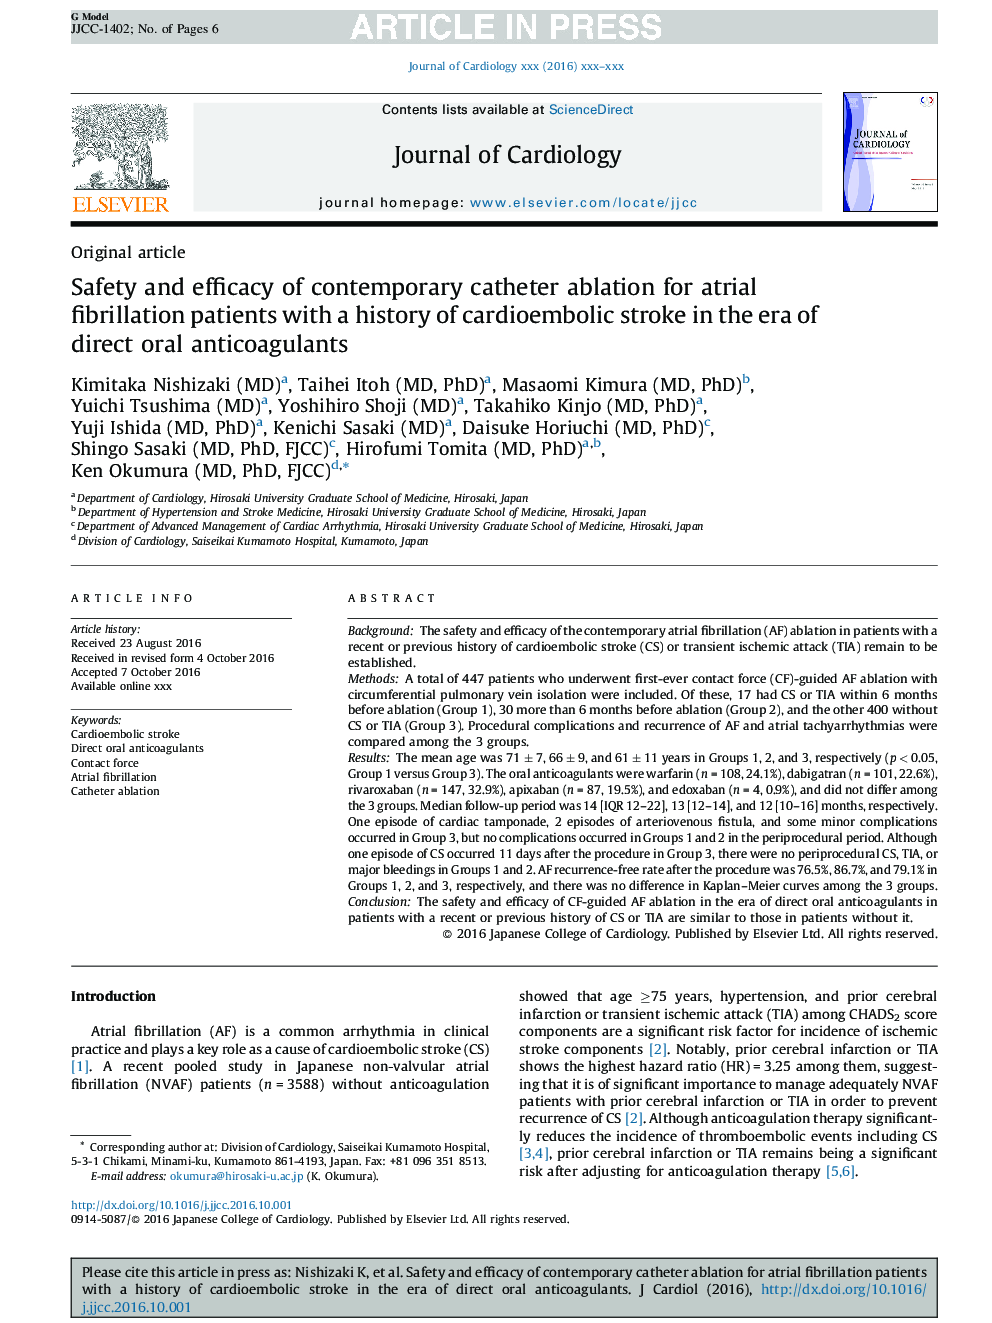 Safety and efficacy of contemporary catheter ablation for atrial fibrillation patients with a history of cardioembolic stroke in the era of direct oral anticoagulants